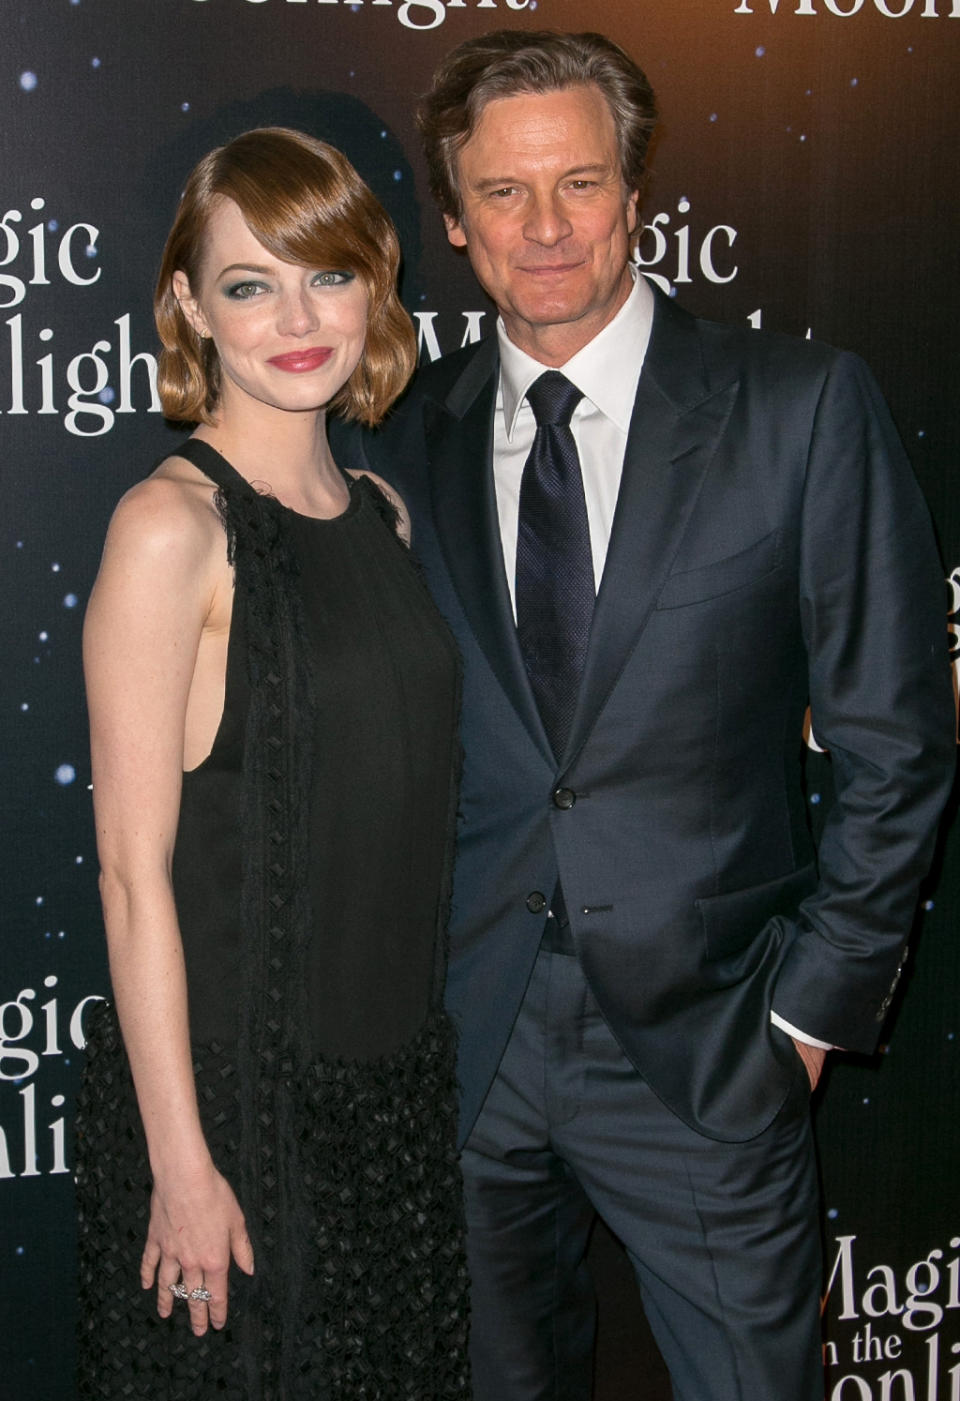 ‘Magic in the Moonlight’ Premiere (2014)